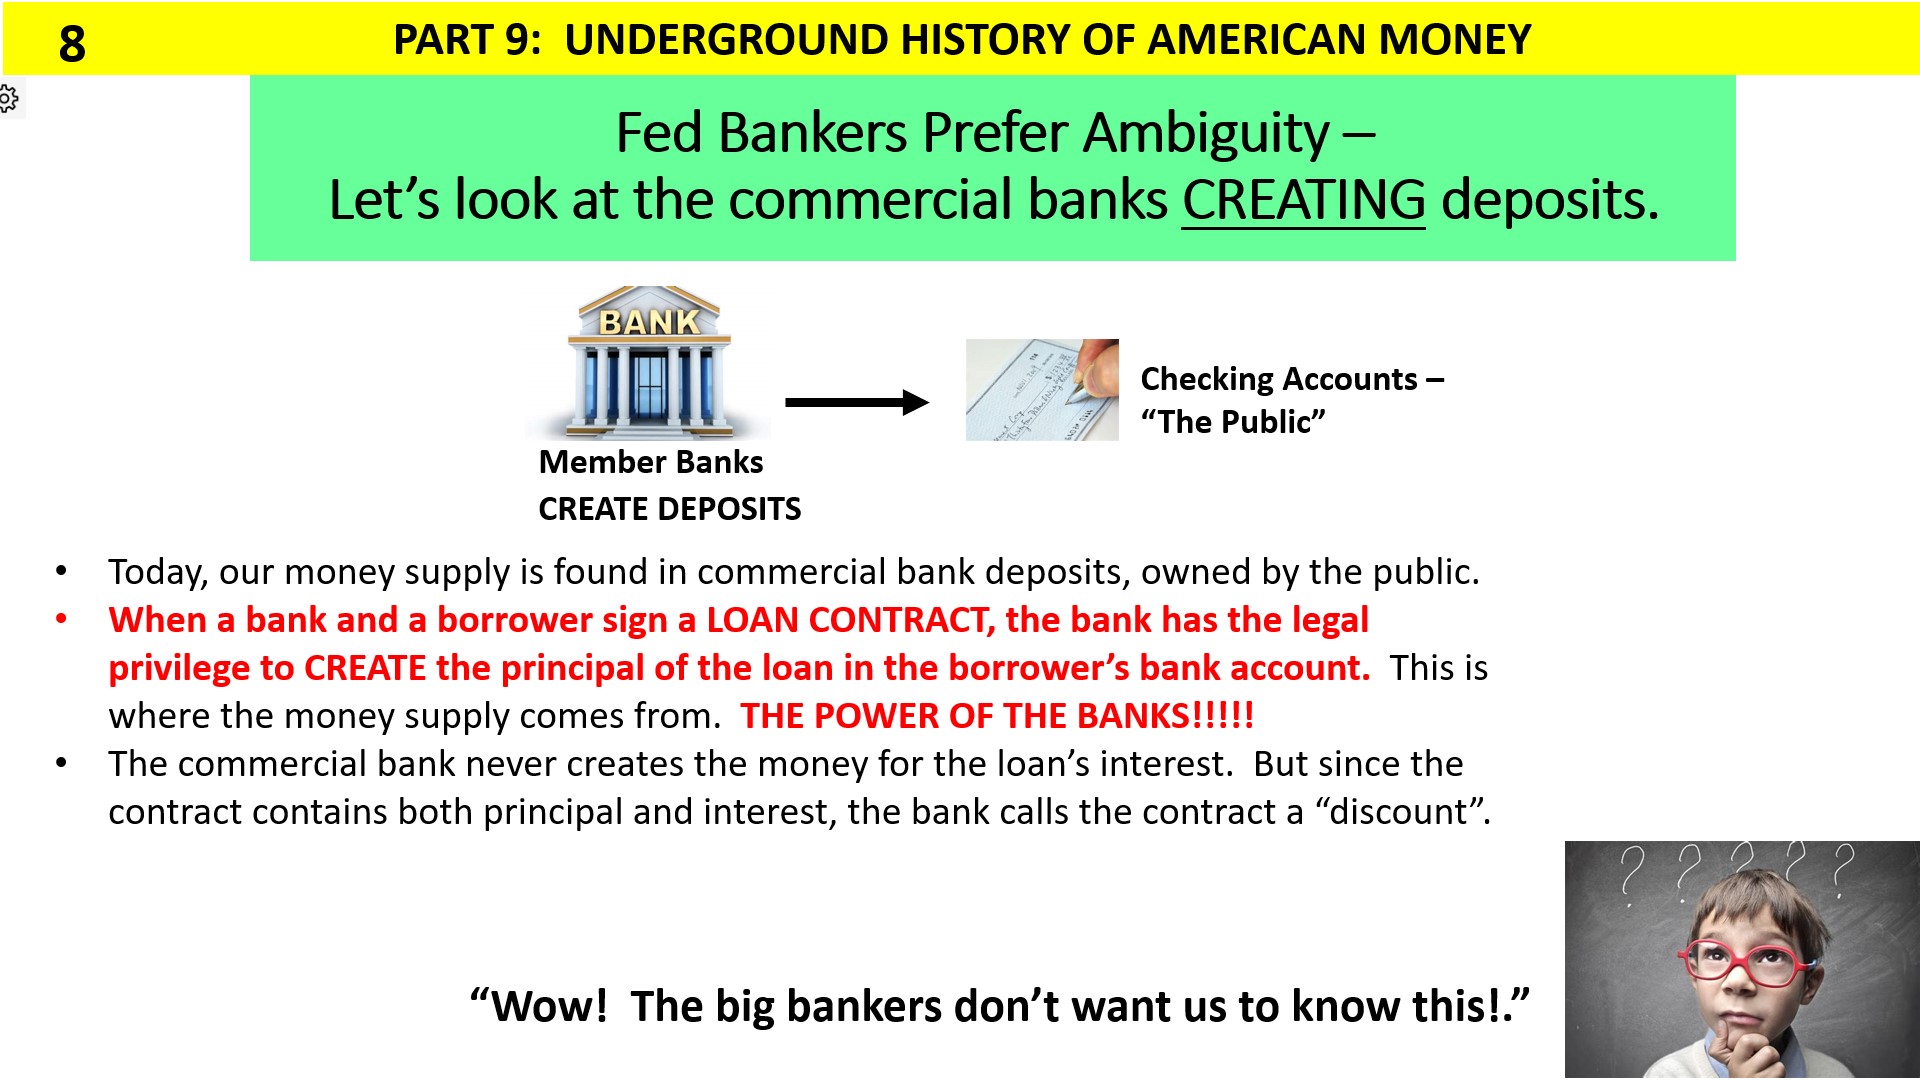 When banks discount or rediscount, they create money to fund debt.